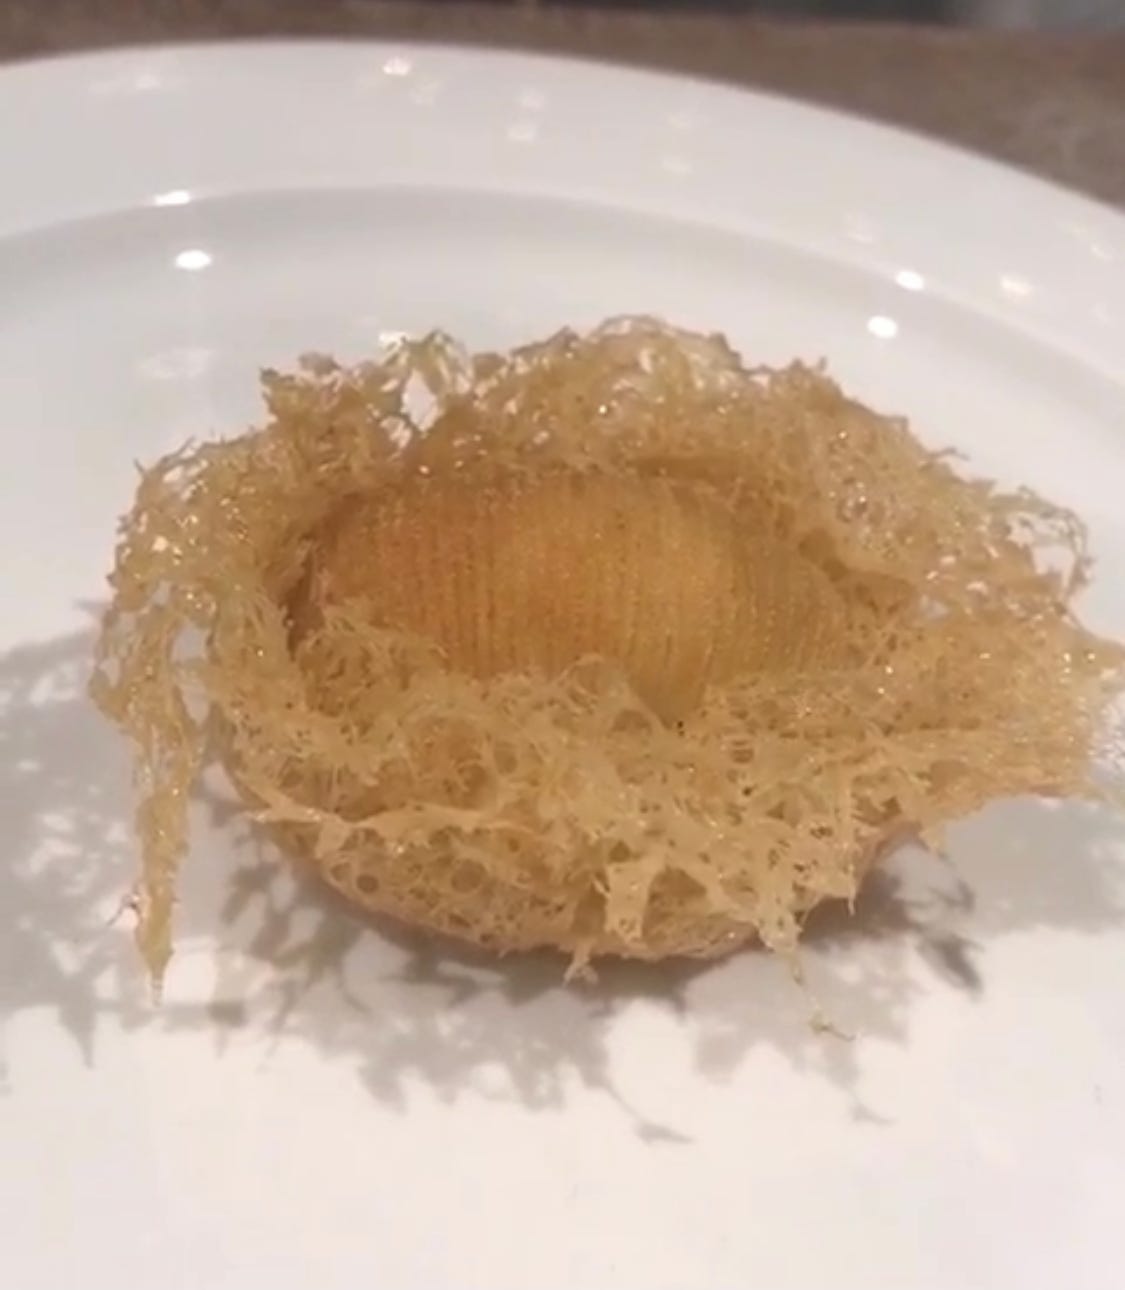 A single baked golden pastry on a white plate